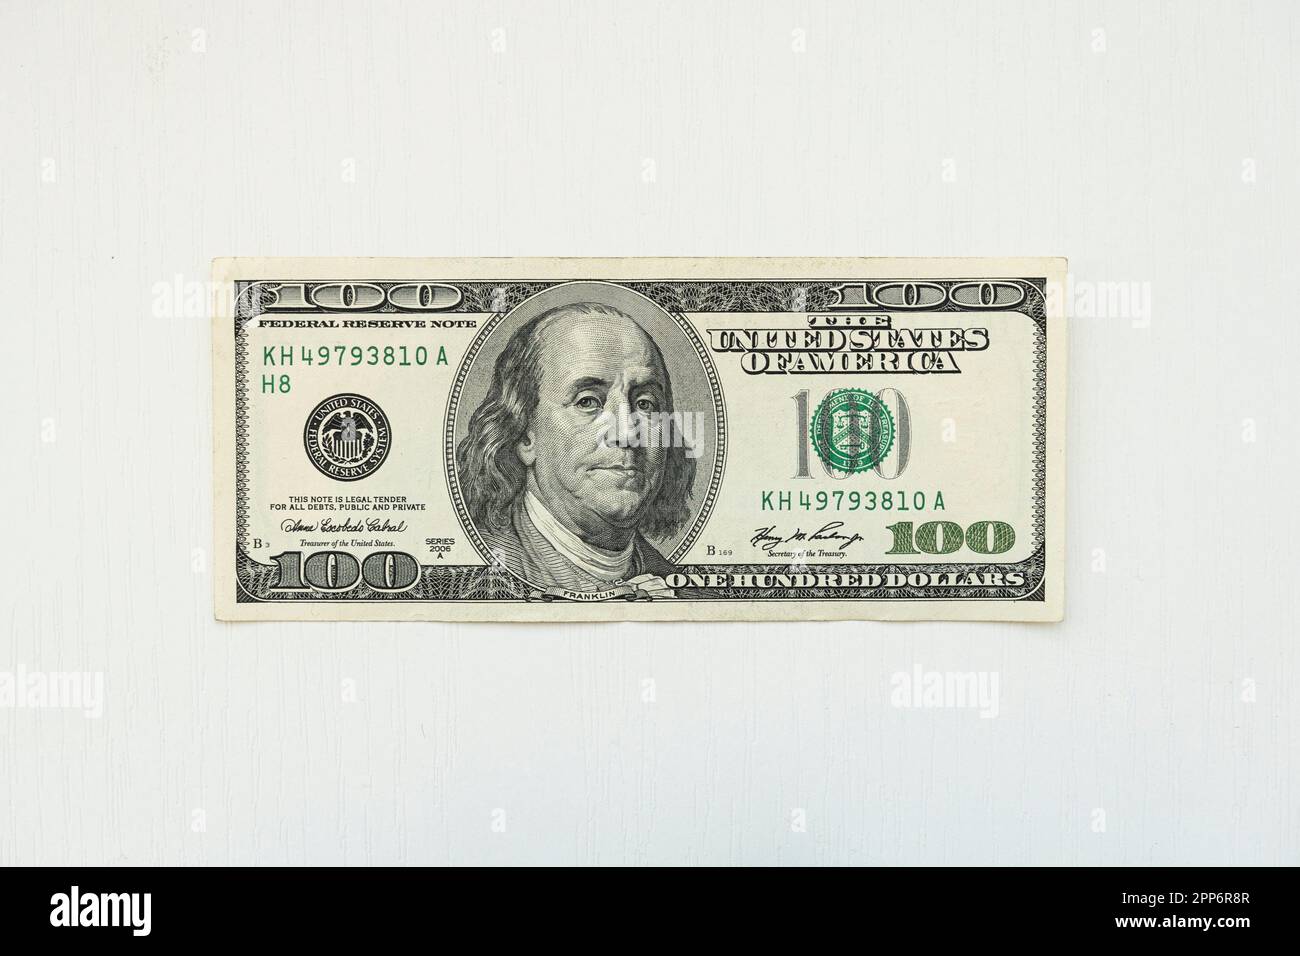 The denomination one hundred dollars bill on white background. the old design of the American 100 dollar bill Stock Photo